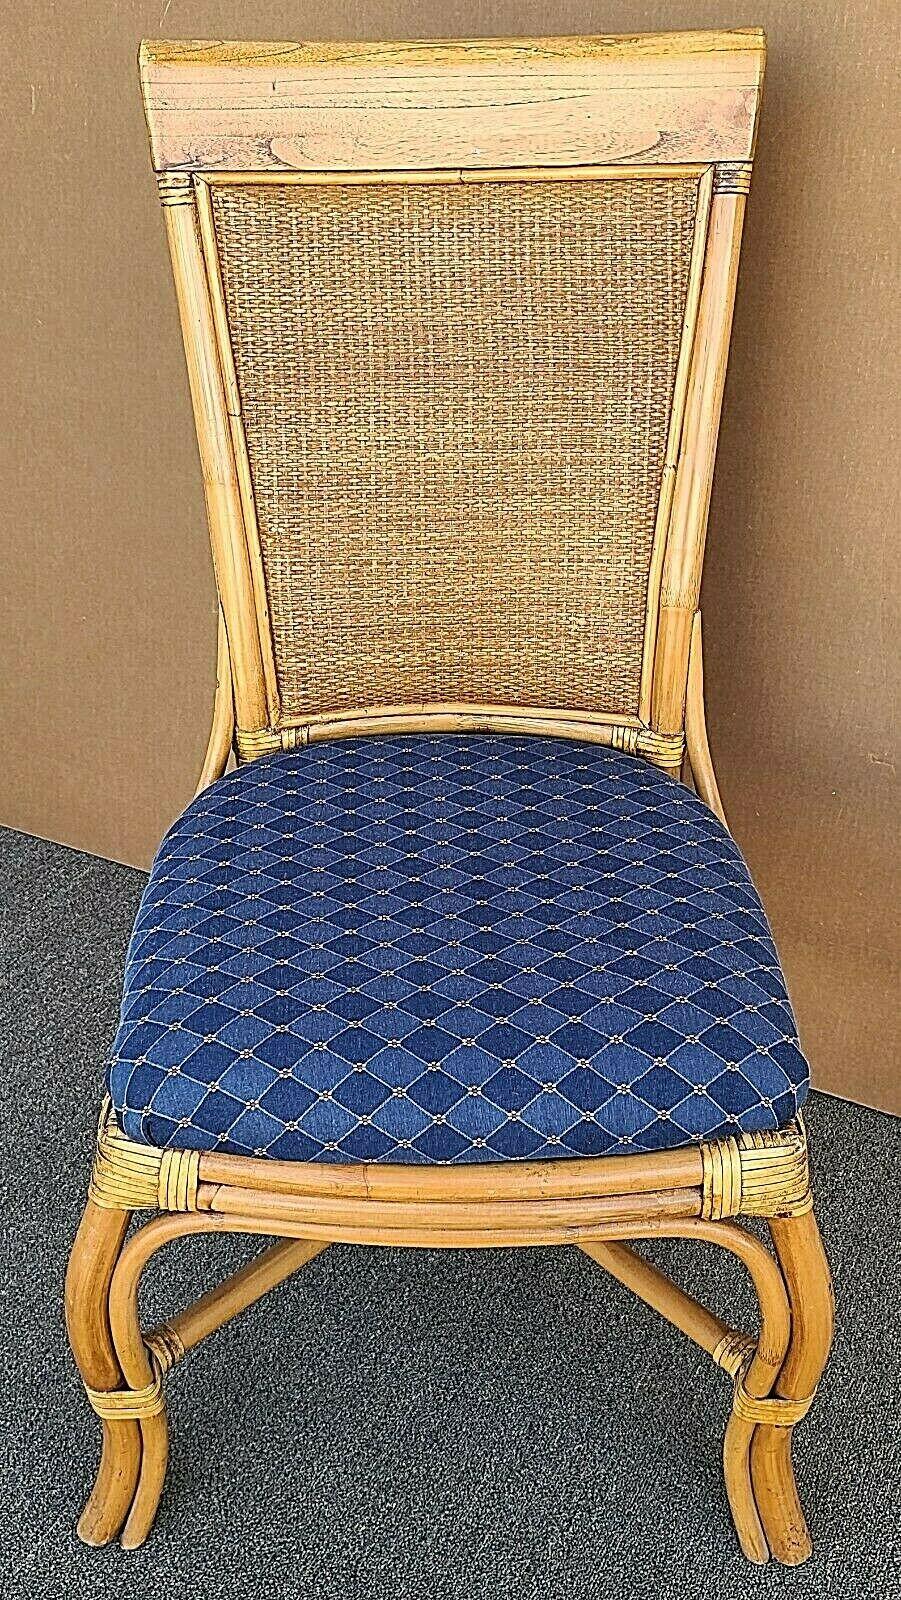 Offering one of our recent palm beach estate fine furniture acquisitions of an
Bamboo Wicker and Leather Rattan Strapping Dining Accent Desk Chair by Braxton Culler

Approximate Measurements in Inches
39.5